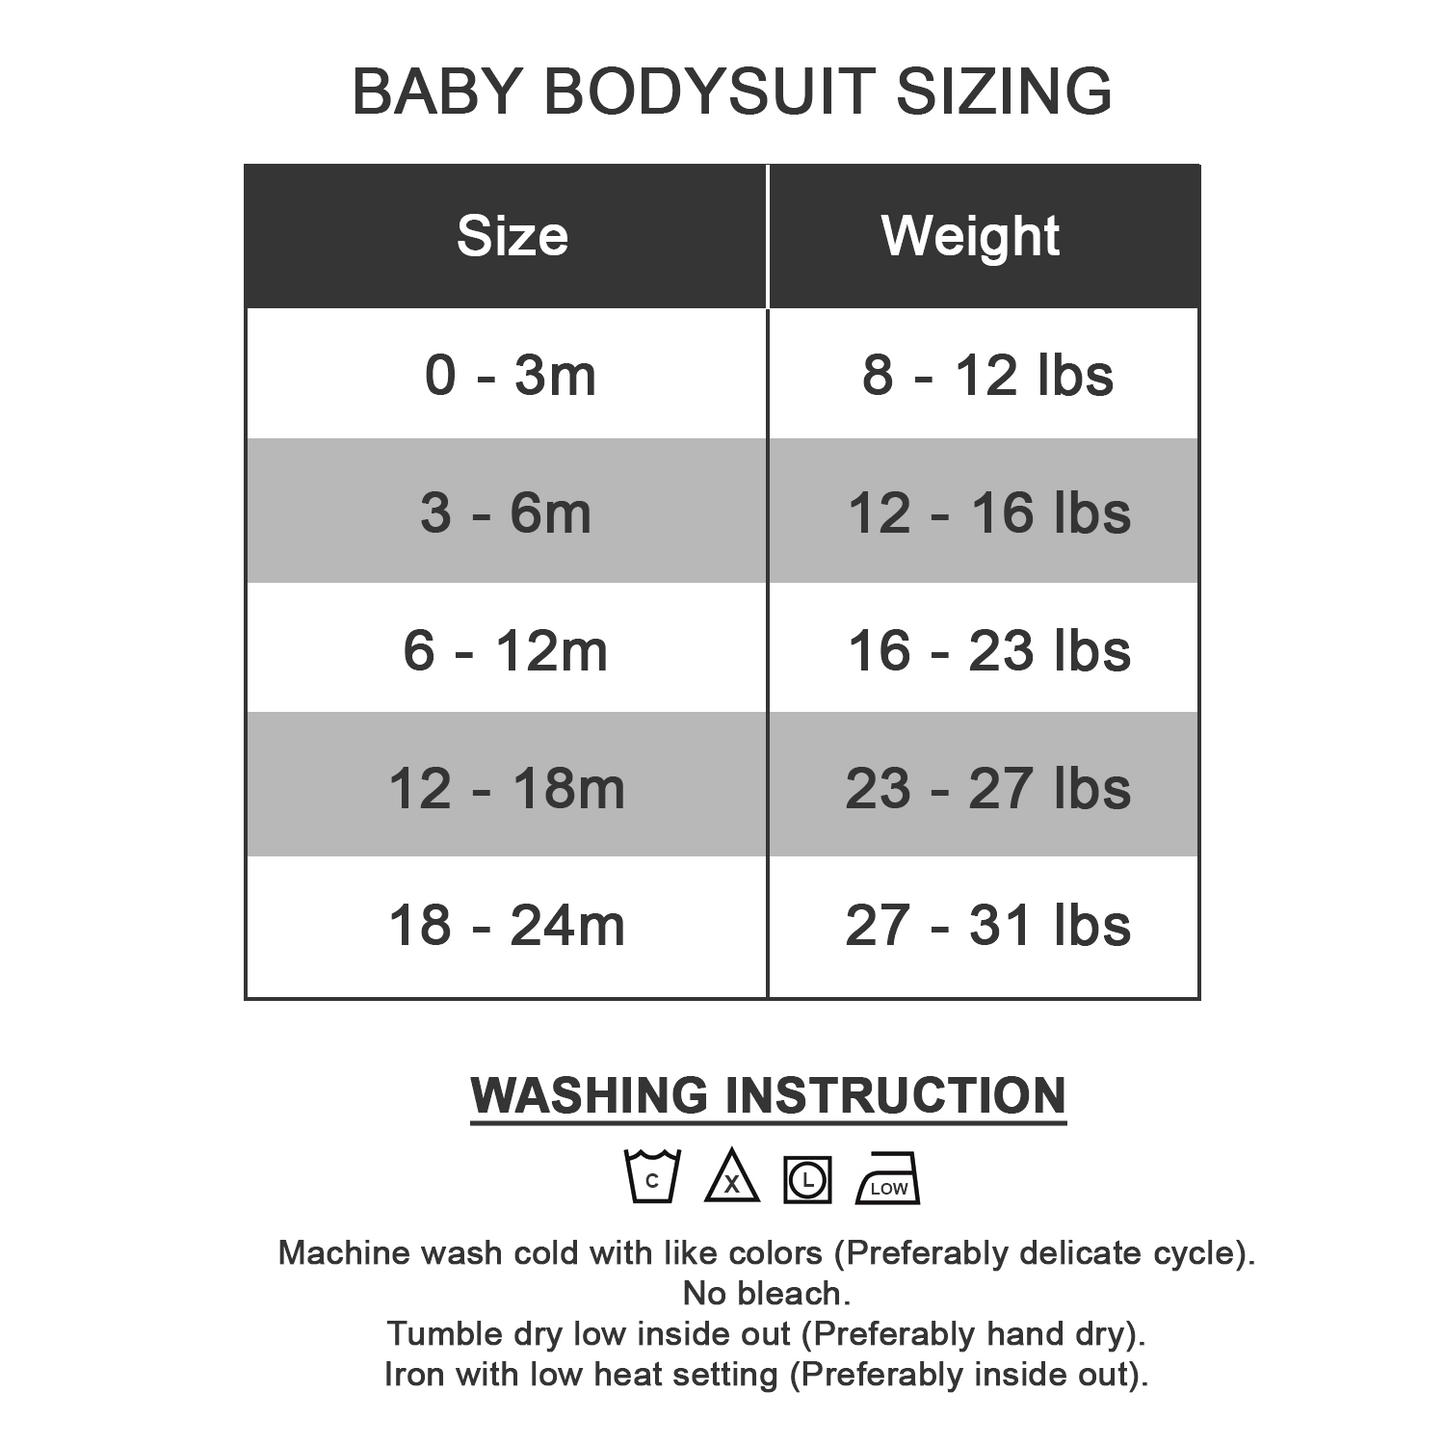 [Personalized] Endanzoo Gender Baby Reveal Organic Baby Bodysuit - It's a BOY